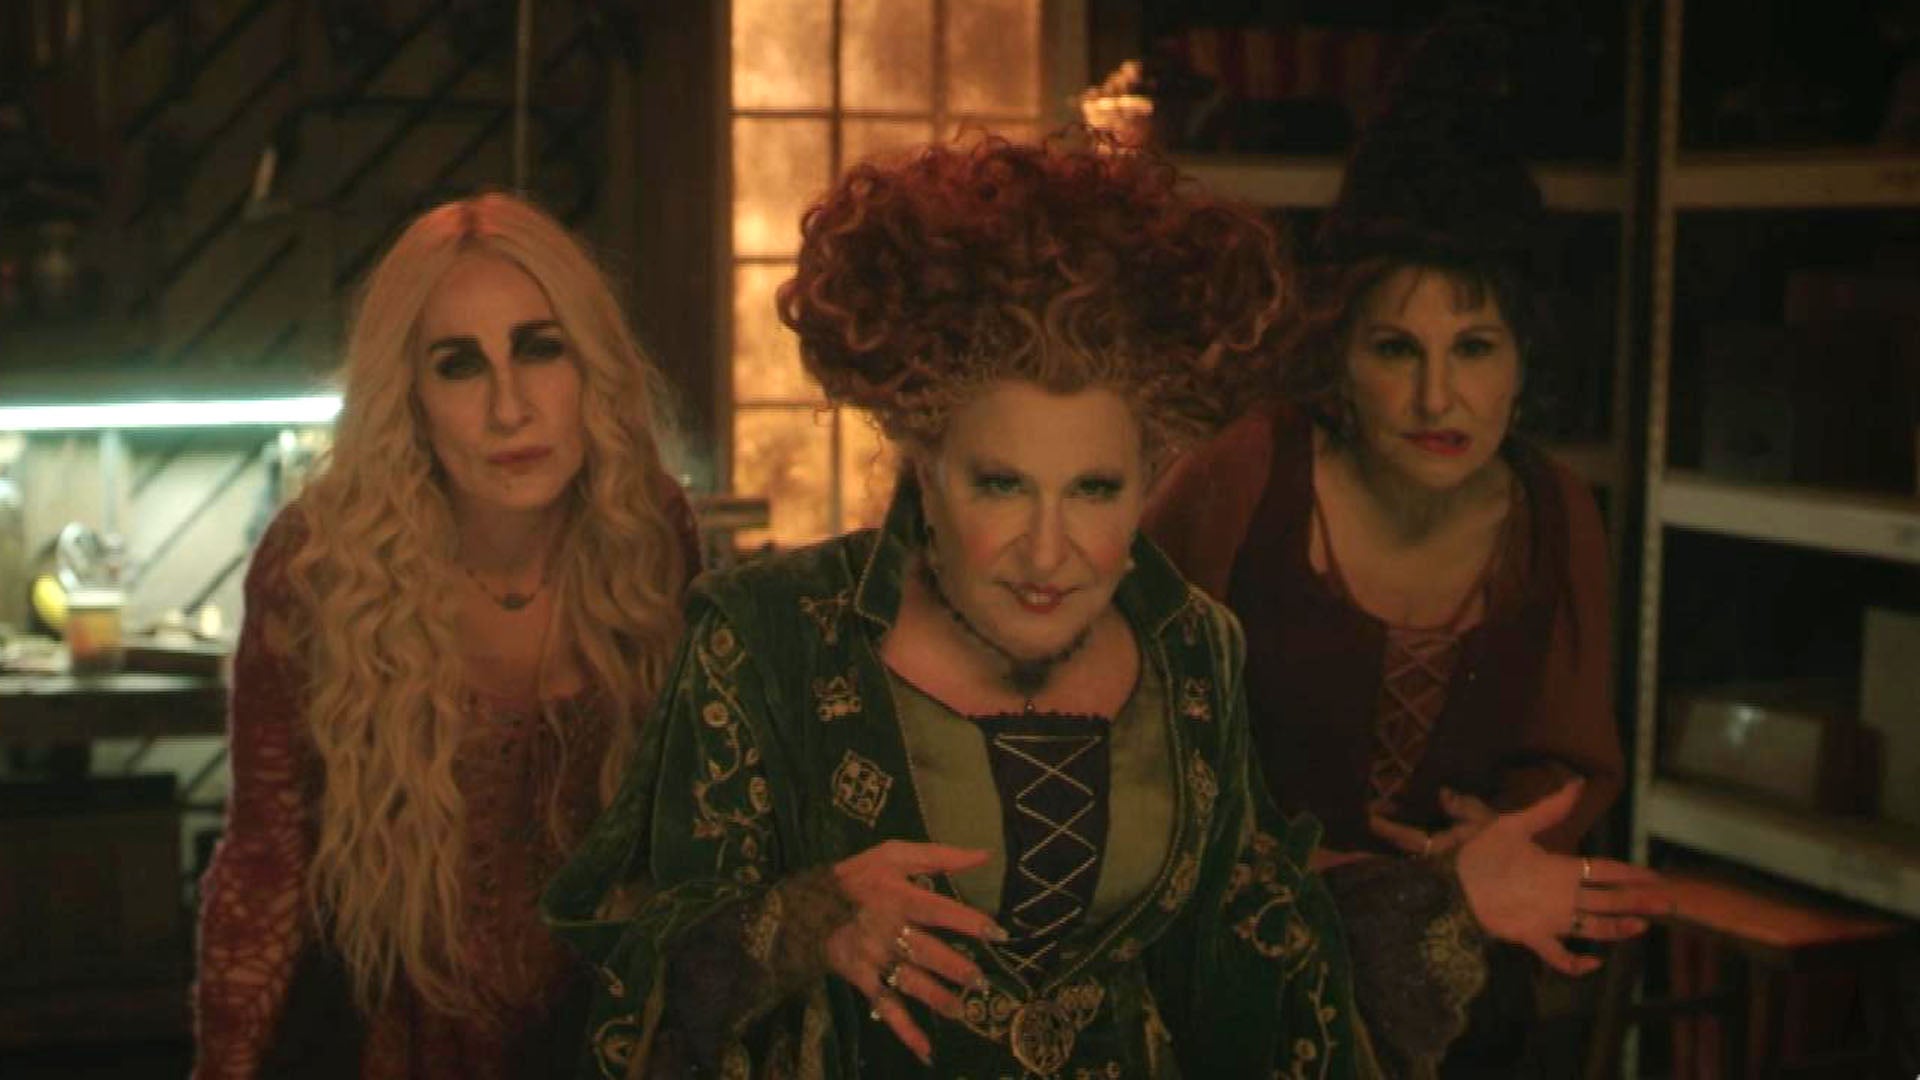 35 Hocus Pocus 2 Easter Eggs You Might've Missed